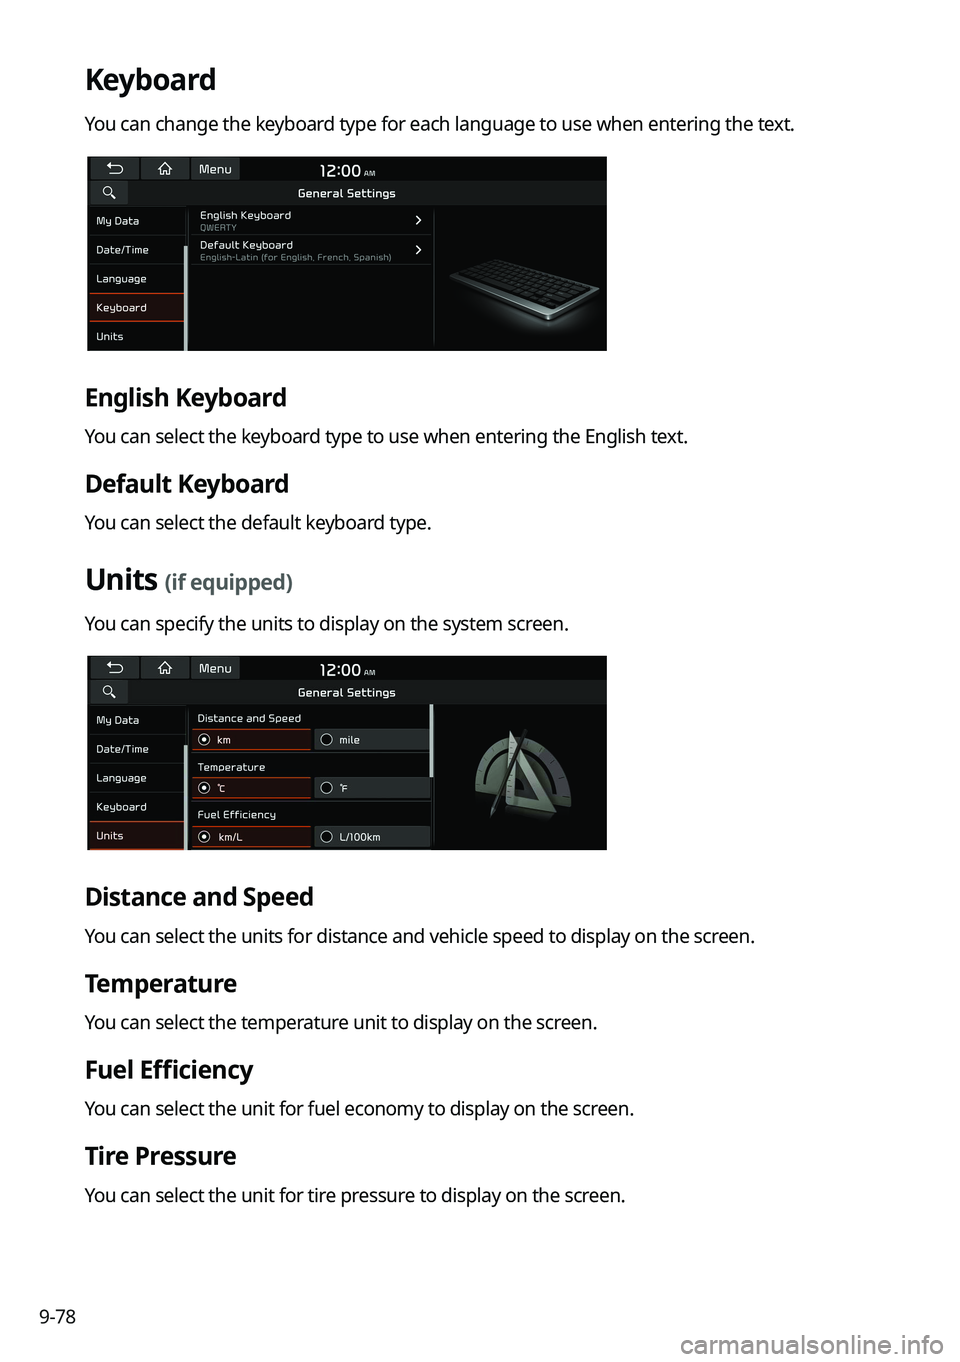 KIA FORTE 2022  Navigation System Quick Reference Guide 9-78
Keyboard
You can change the keyboard type for each language to use when entering the text.
English Keyboard
You can select the keyboard type to use when entering the English text.
Default Keyboar